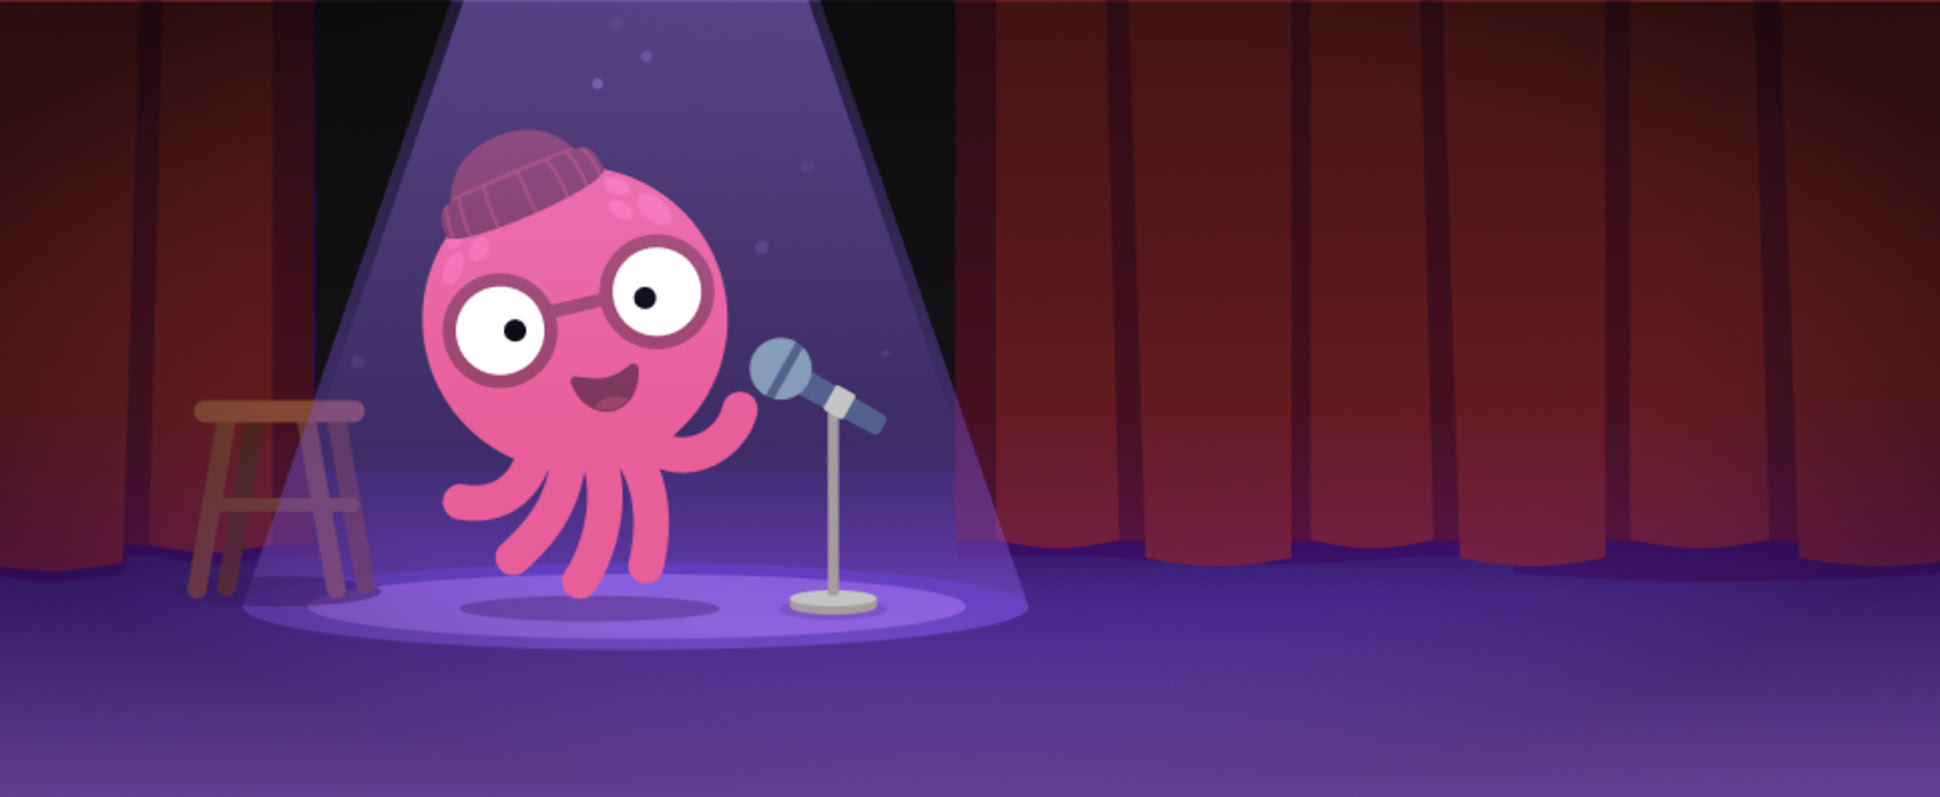 A cute pink octopus character wearing a purple beanie hat performing a poem under a spotlight on a stage with a stool and microphone